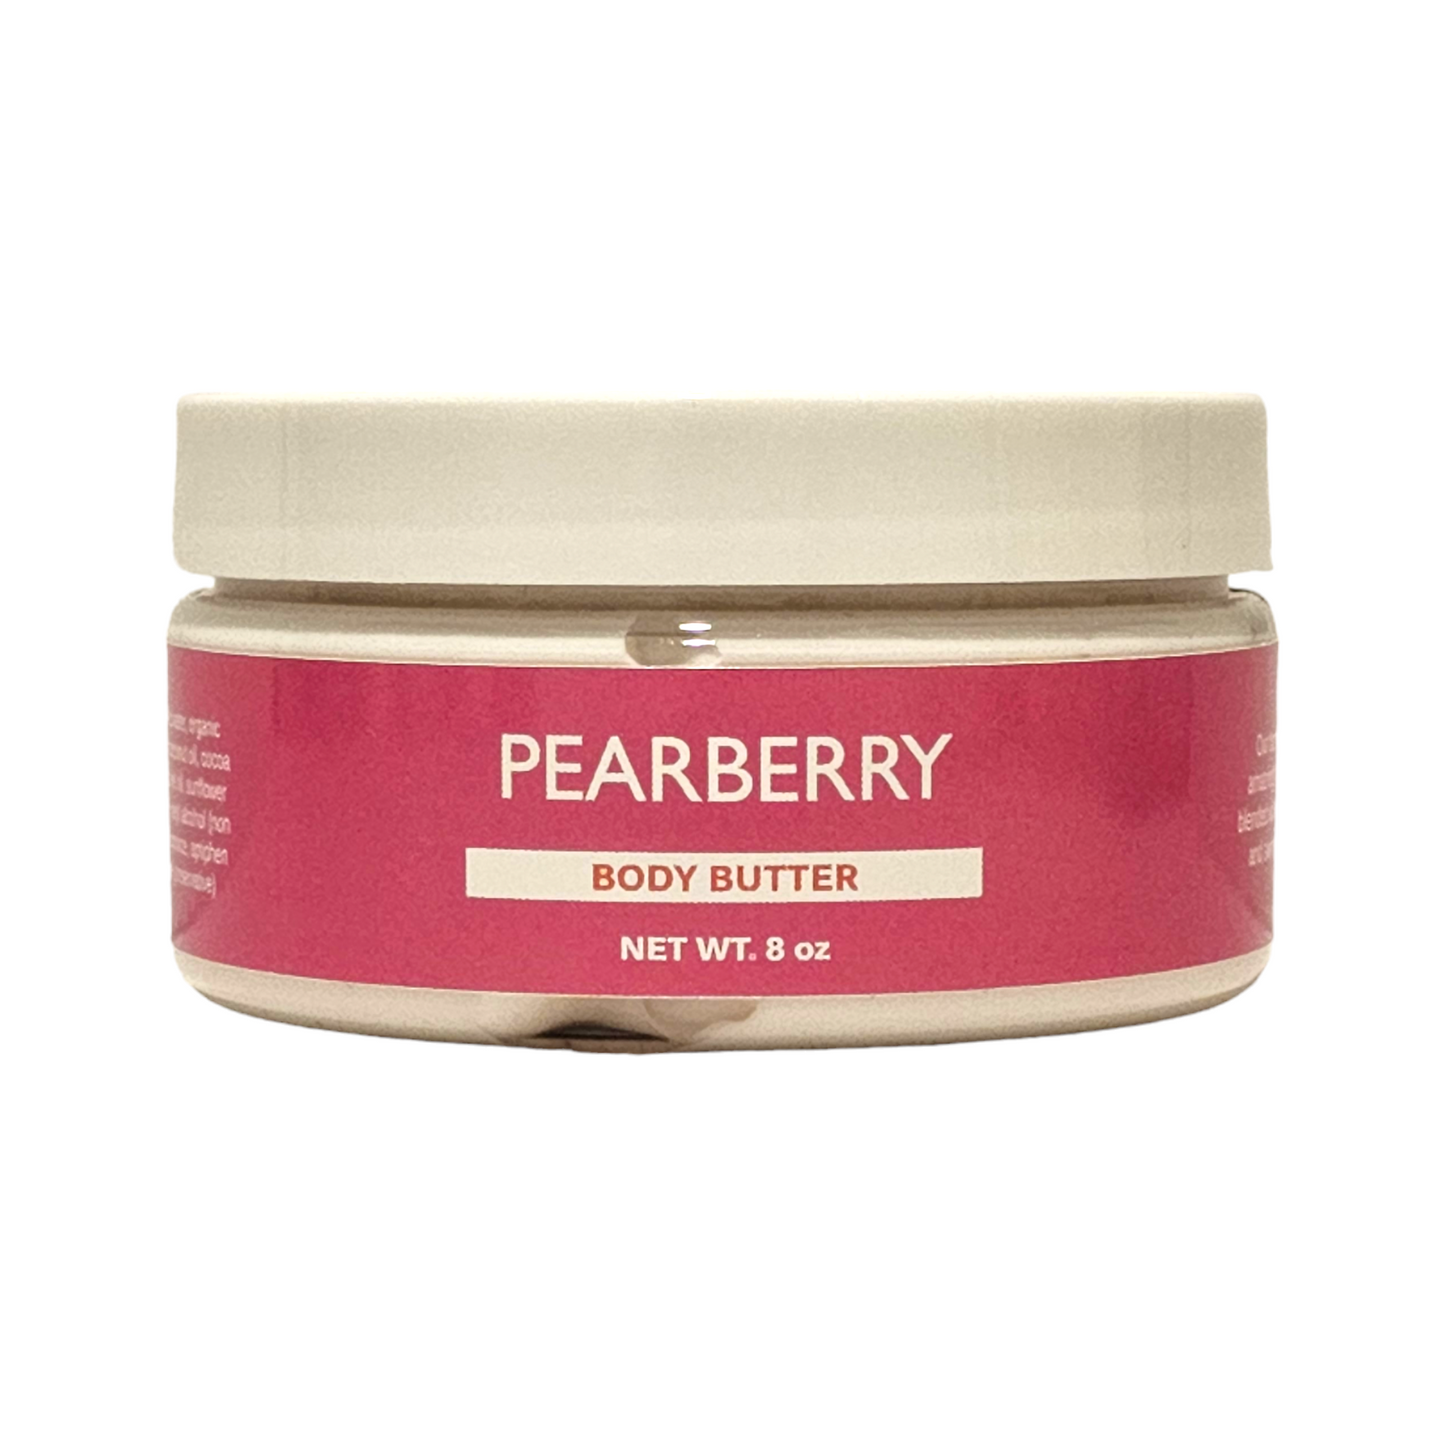 Pearberry Body Butter